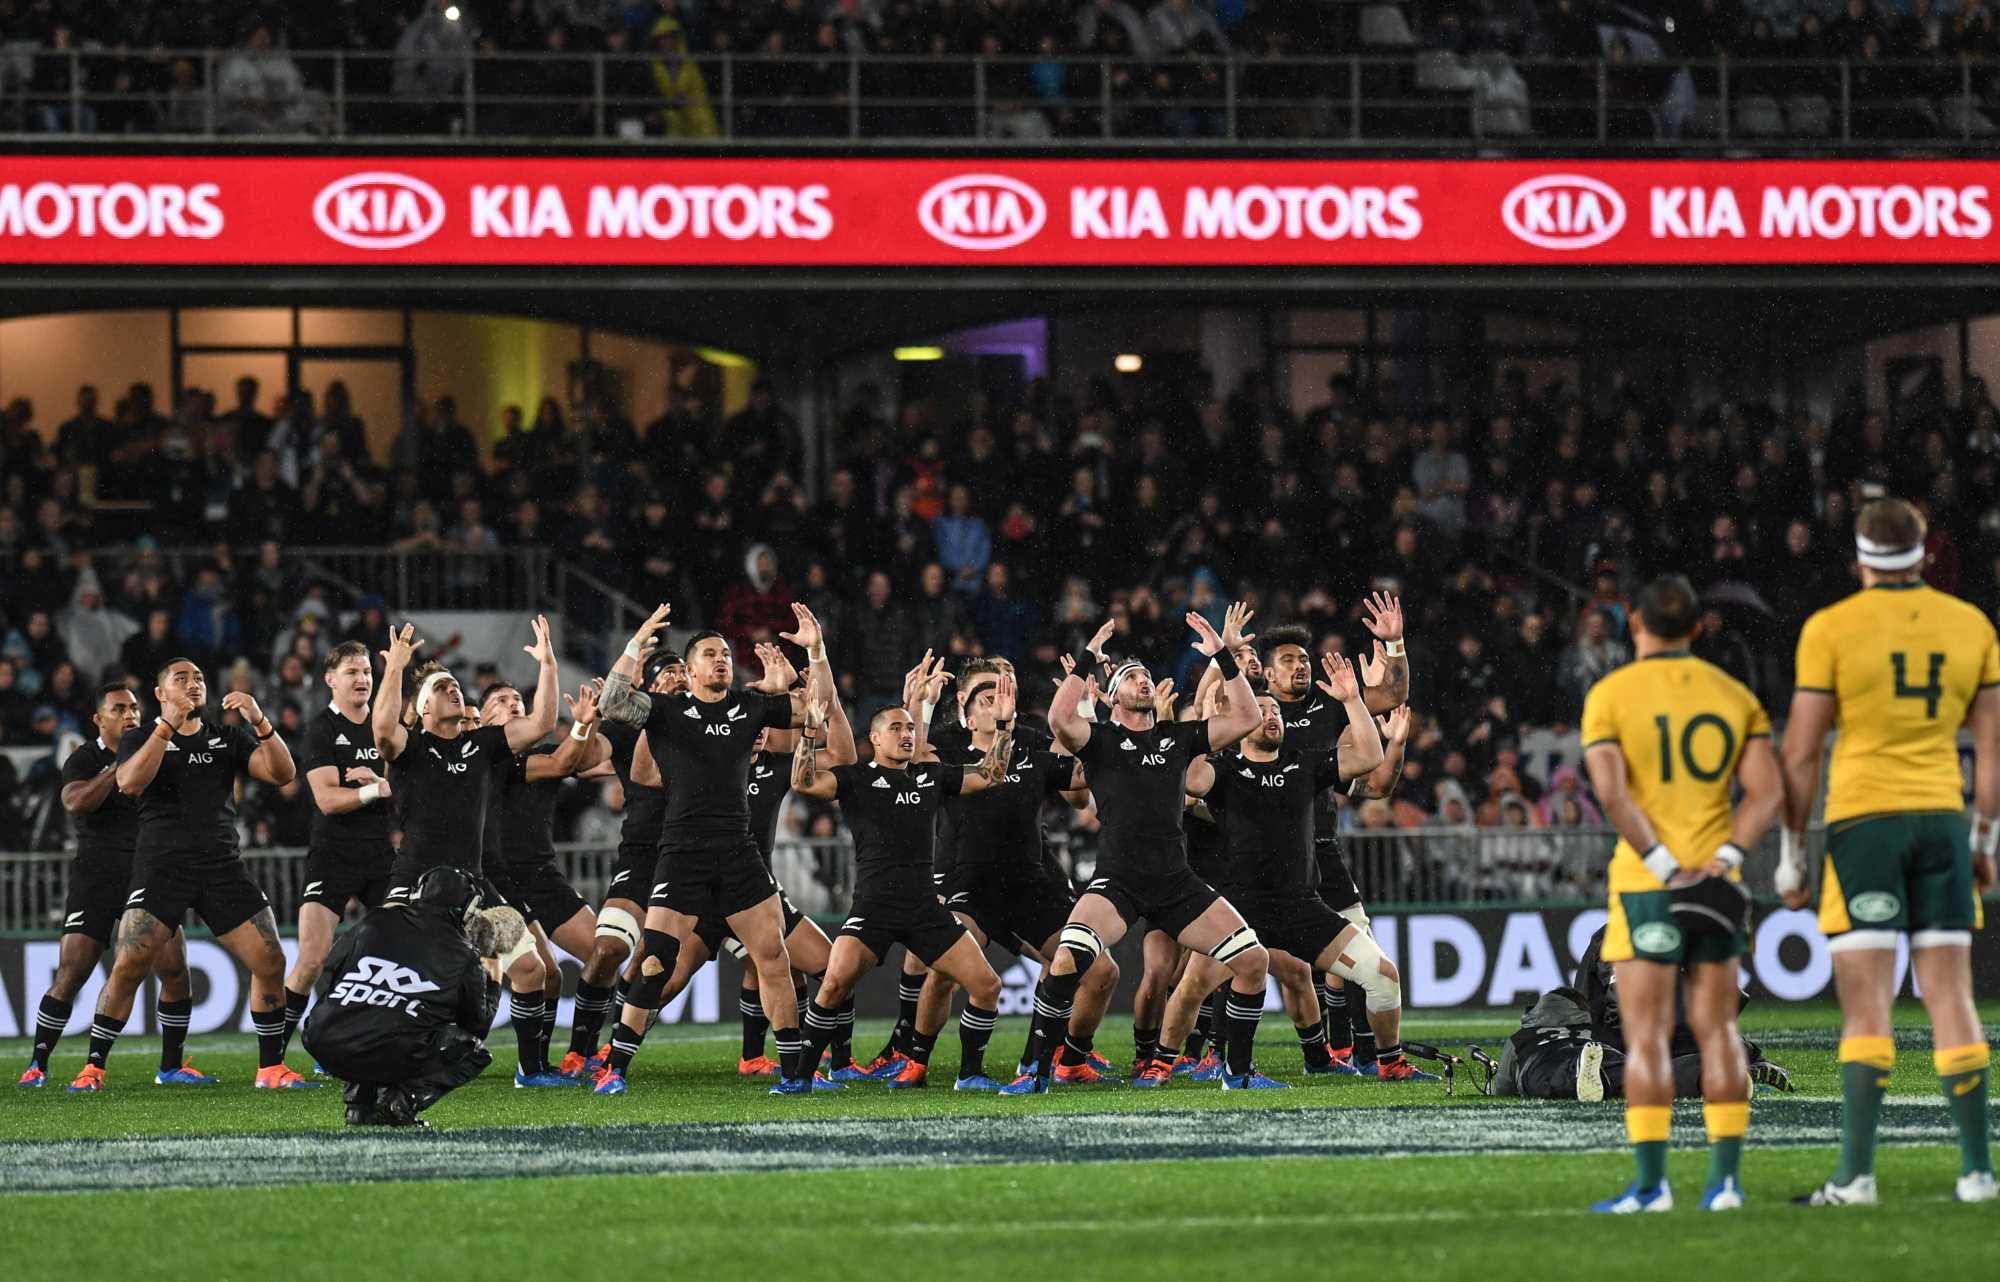 Two All Black Test Matches announced for Eden Park